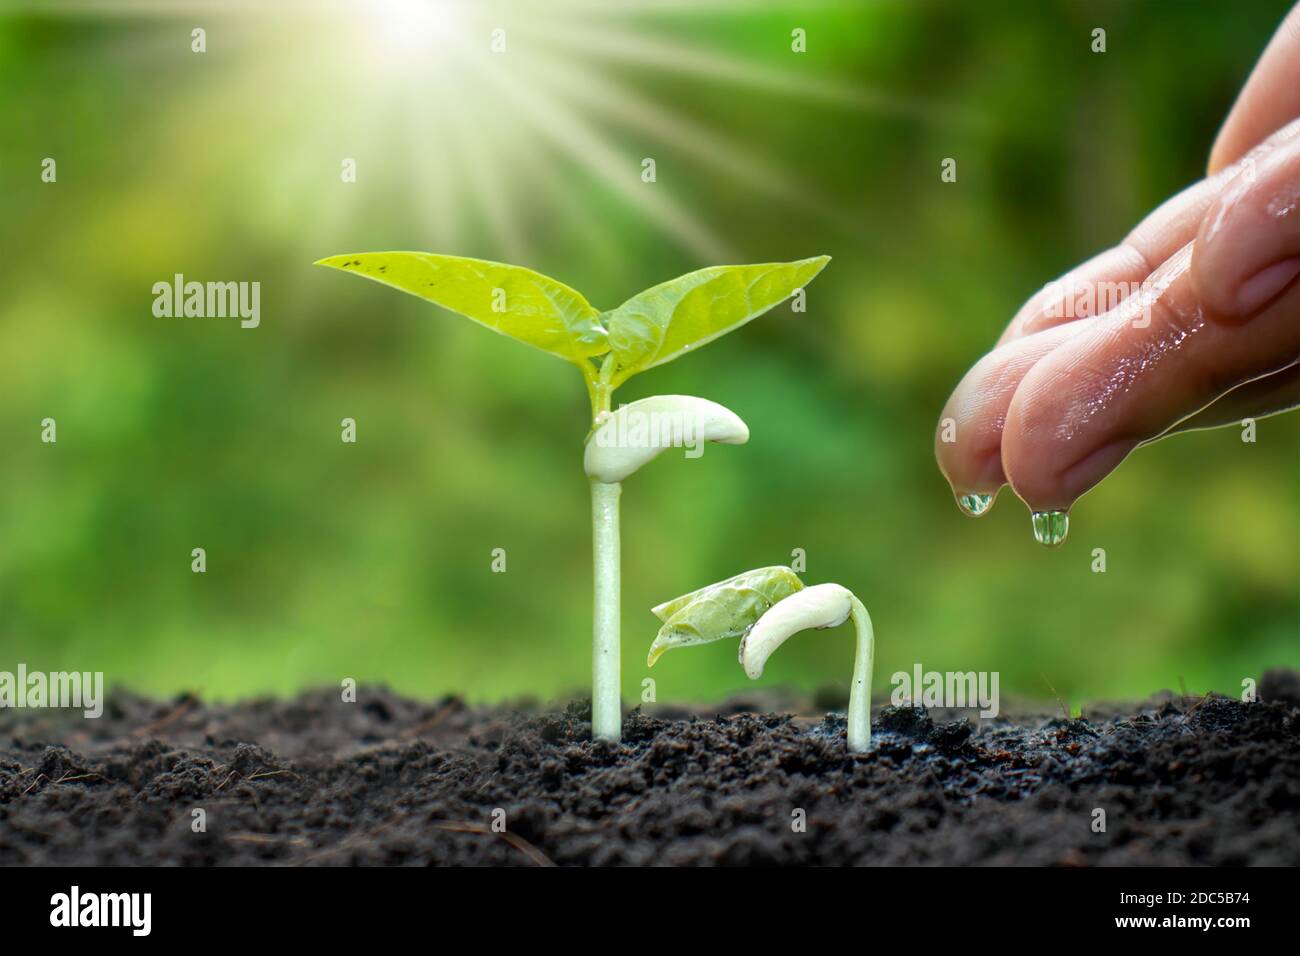 Growing crops on fertile soil and watering plants, including showing stages of plant growth, cropping concepts and investments for farmers. Stock Photo